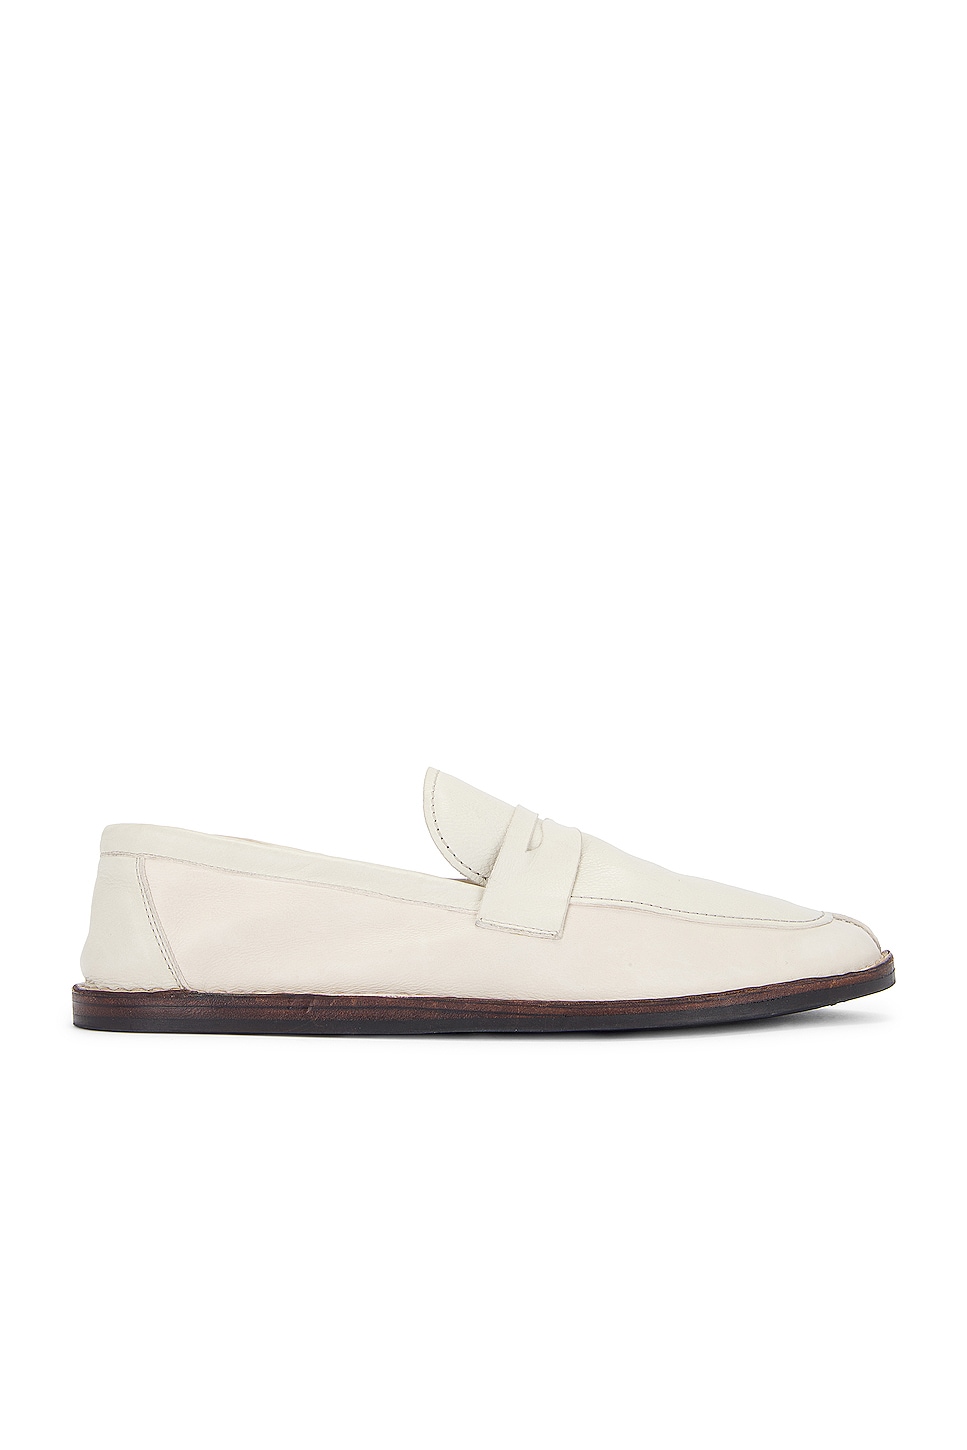 Image 1 of The Row Cary Loafer in TOFU